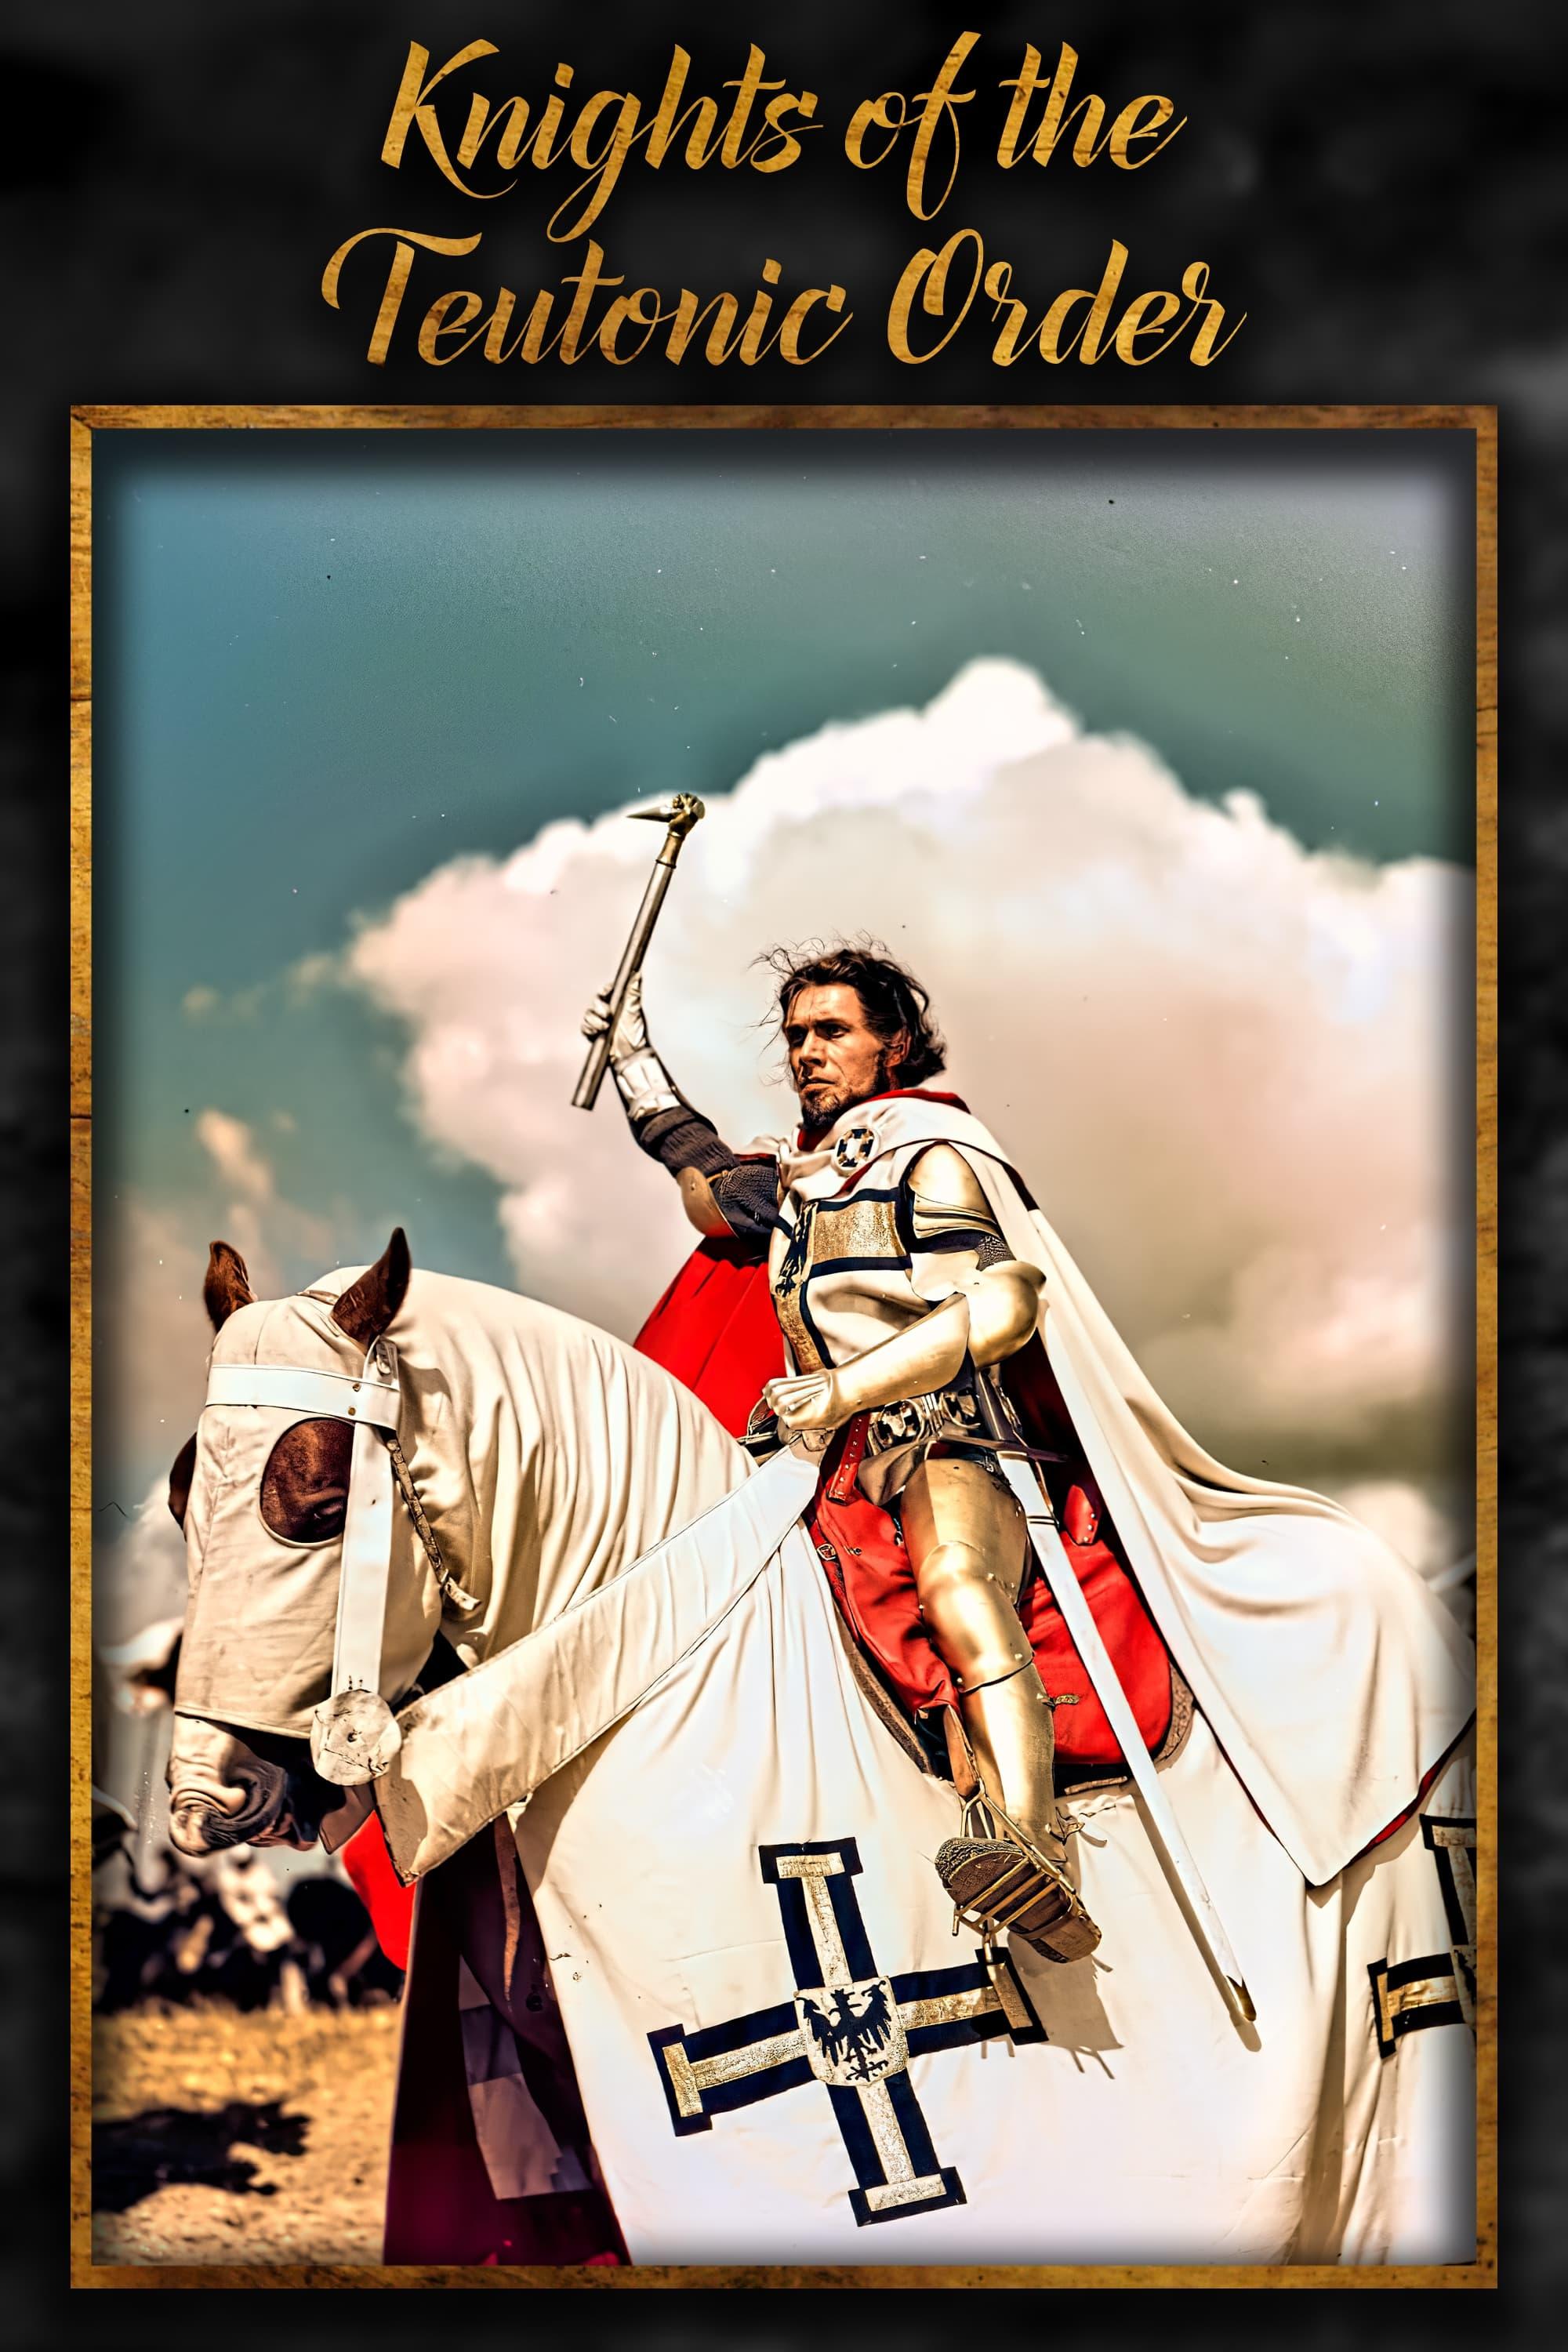 Knights of the Teutonic Order poster